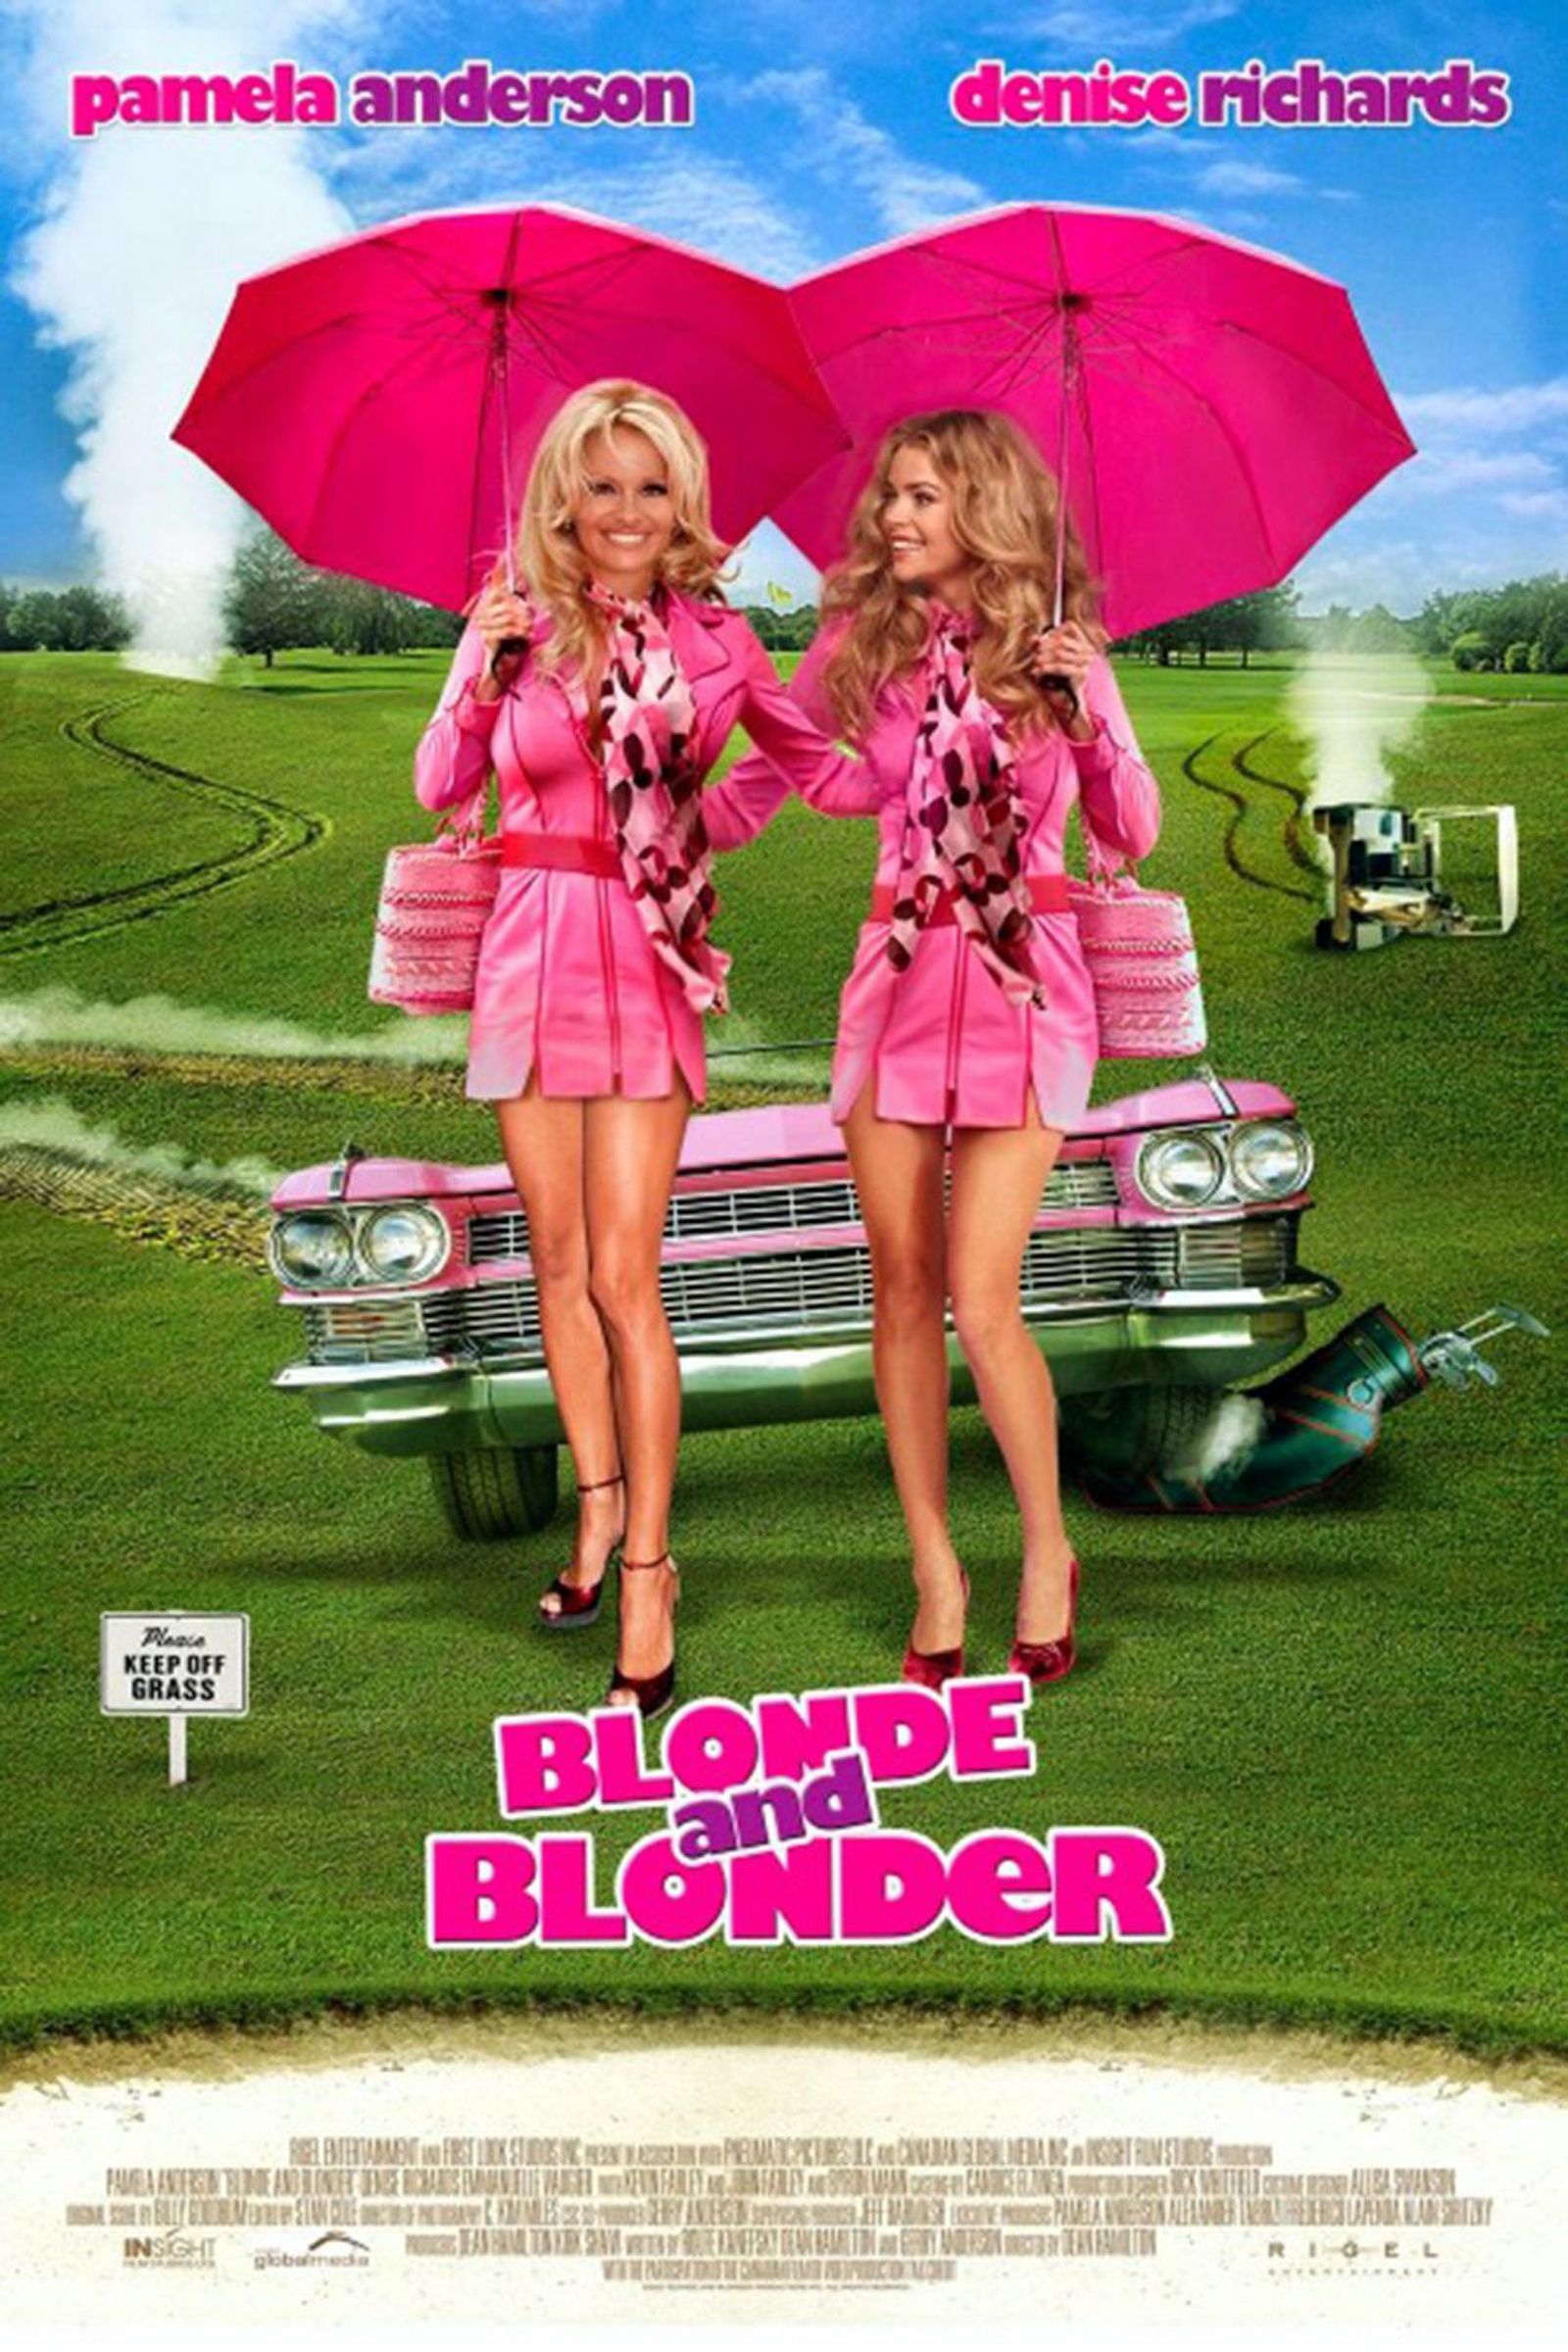 Photoshop Fails Go To The Movies image 1